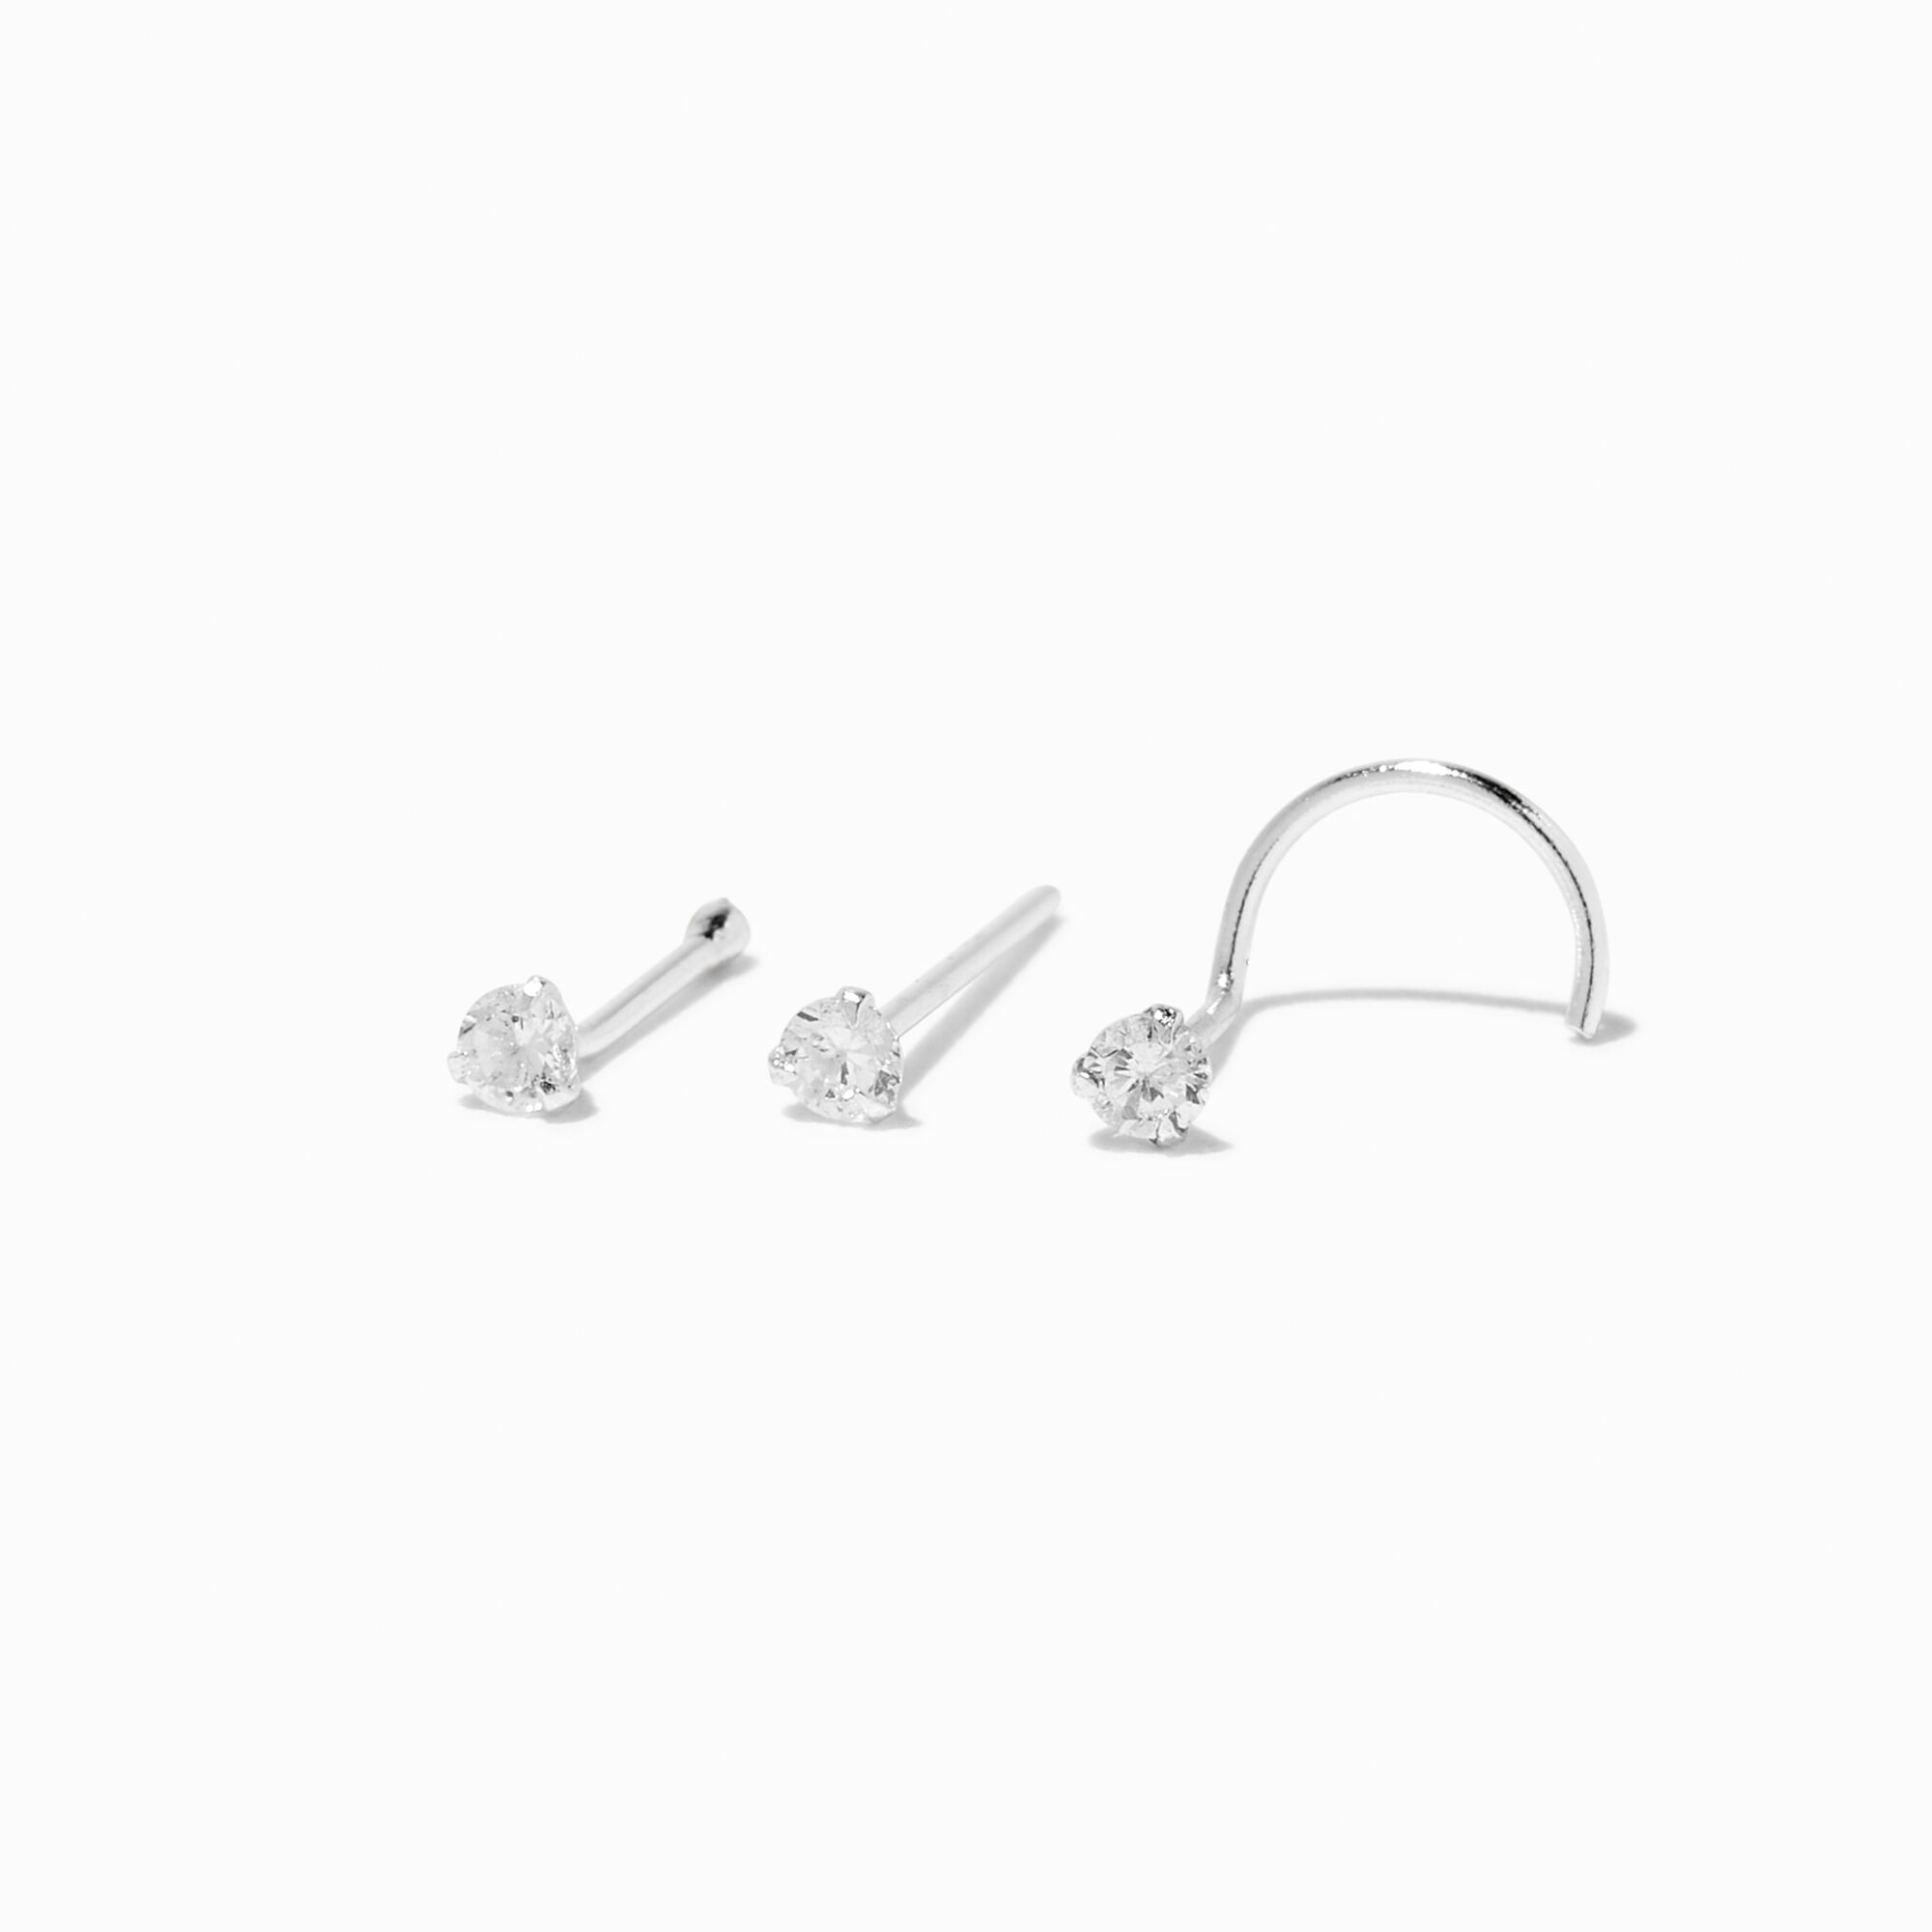 View Claires Cubic Zirconia 22G Nose Studs 3 Pack Silver information